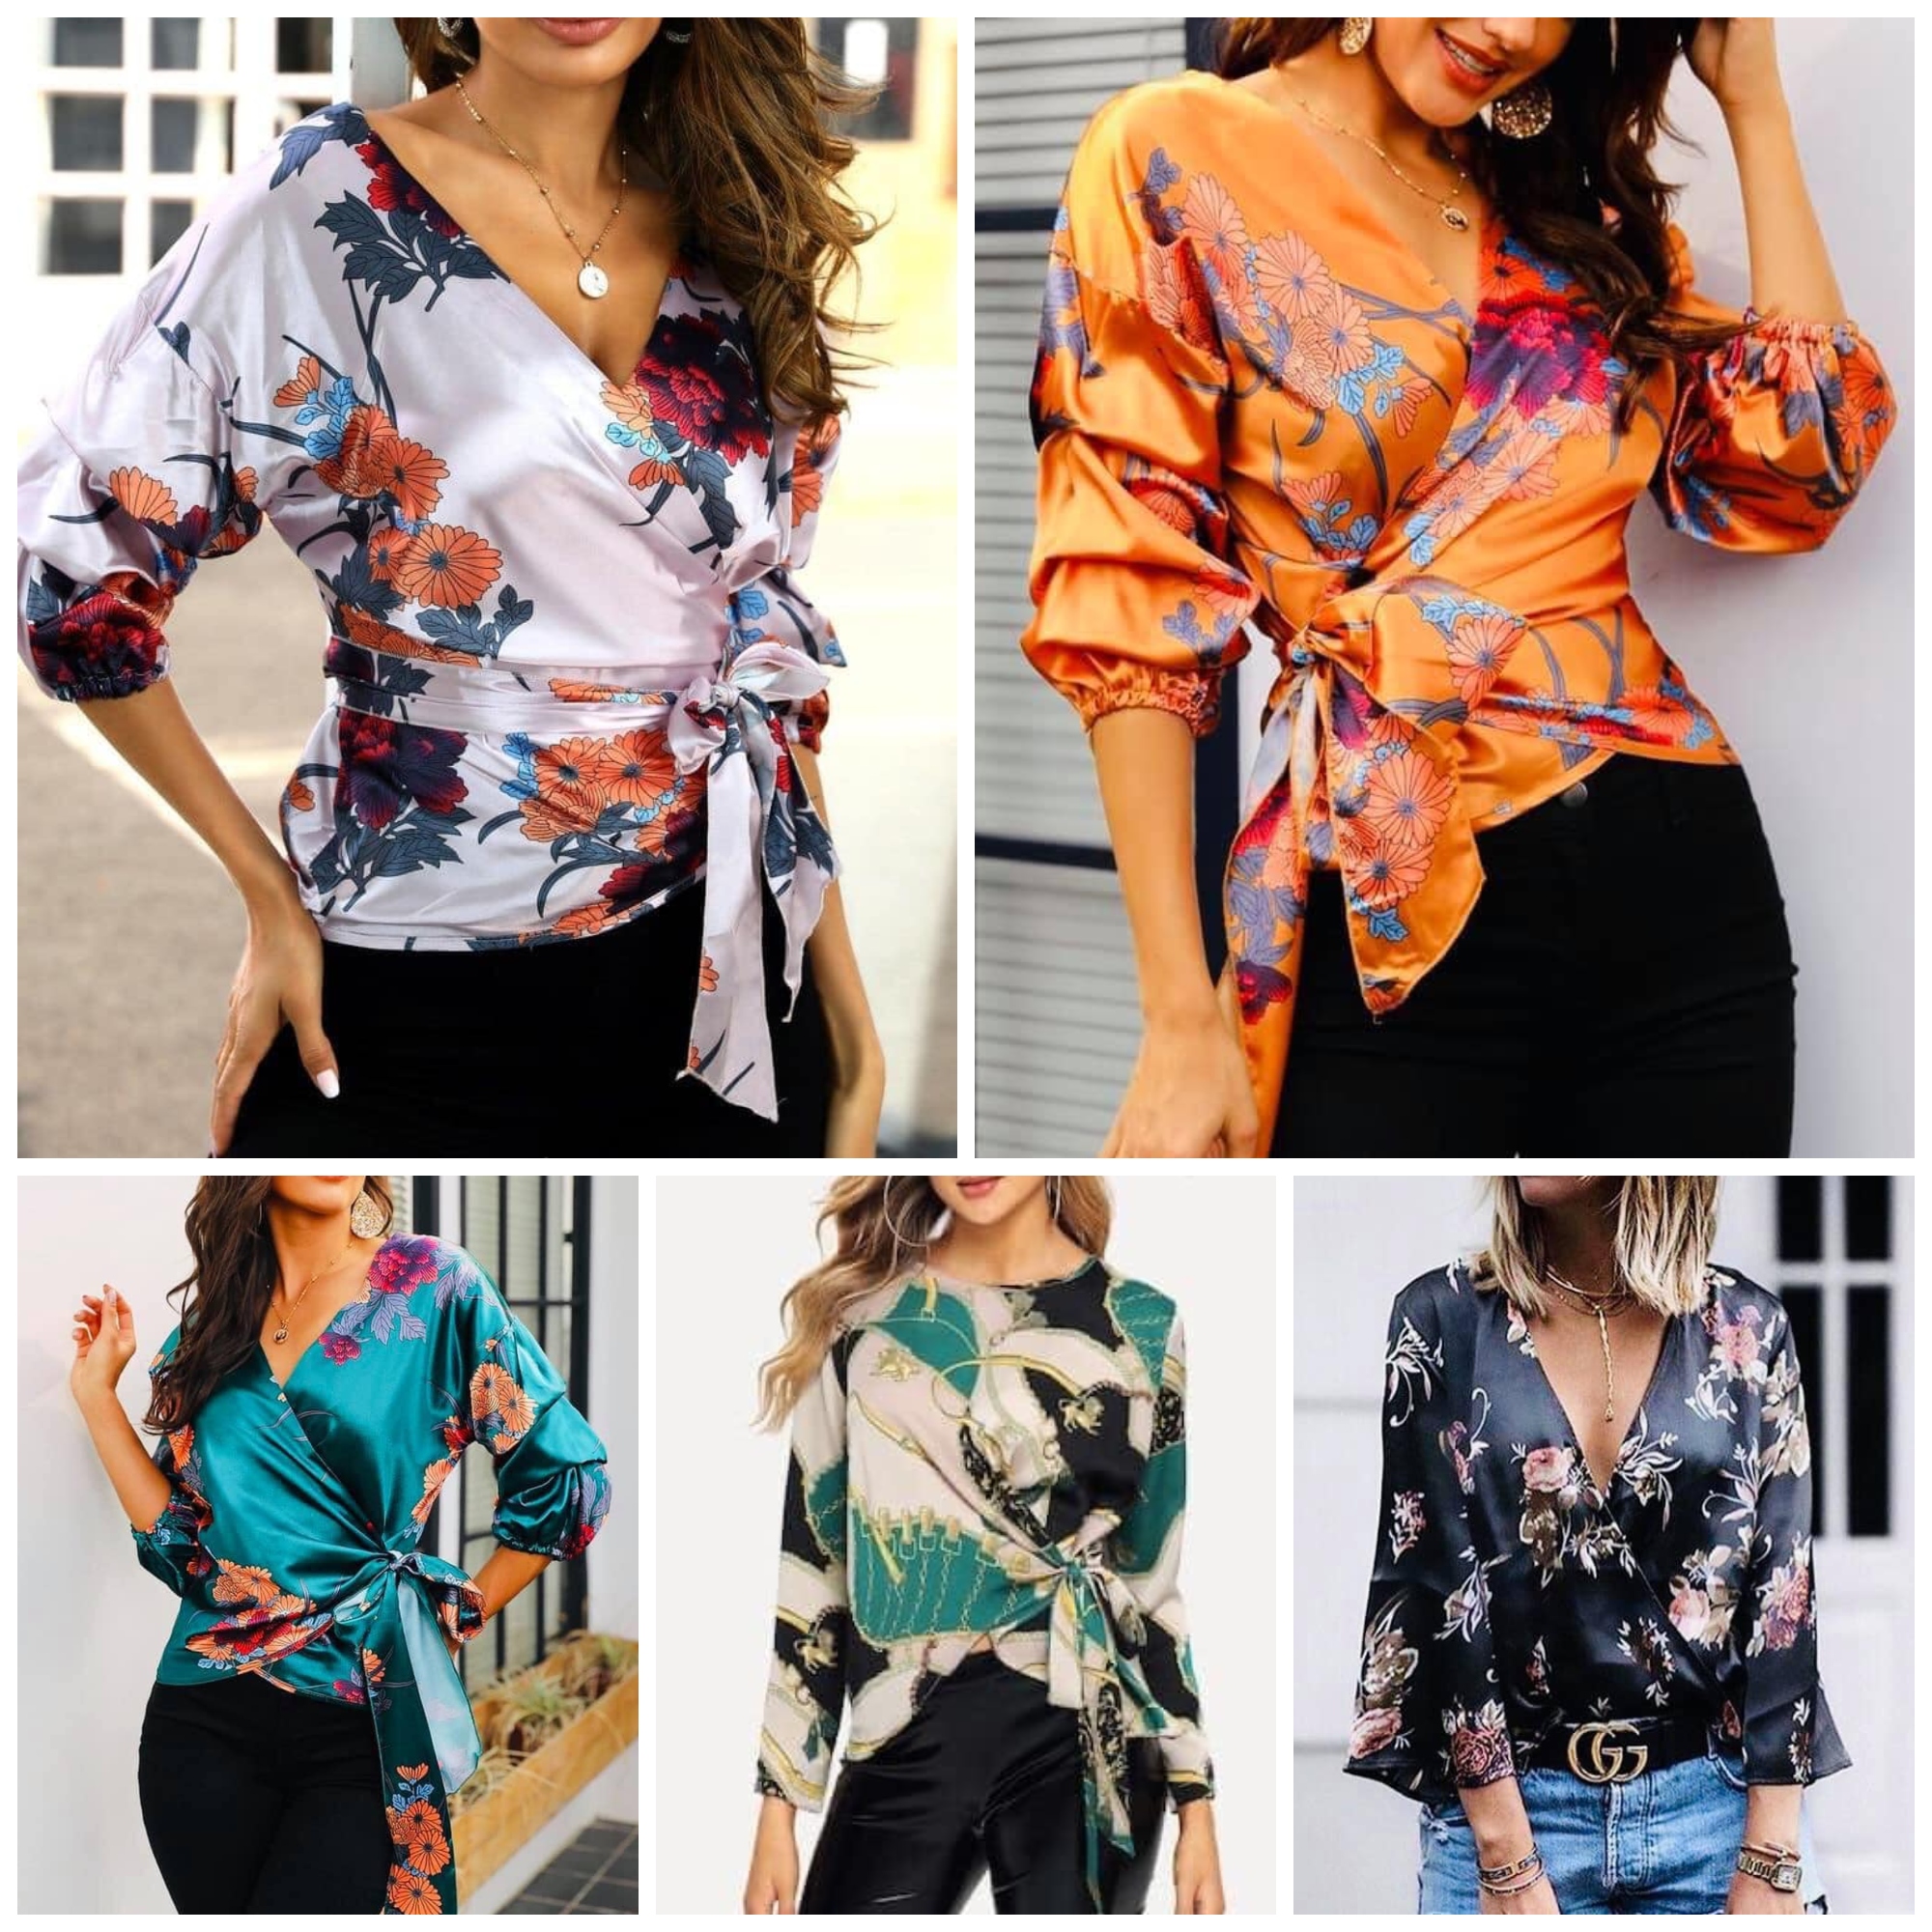 Trending Designs of Wrap Tops for Women in Fashion